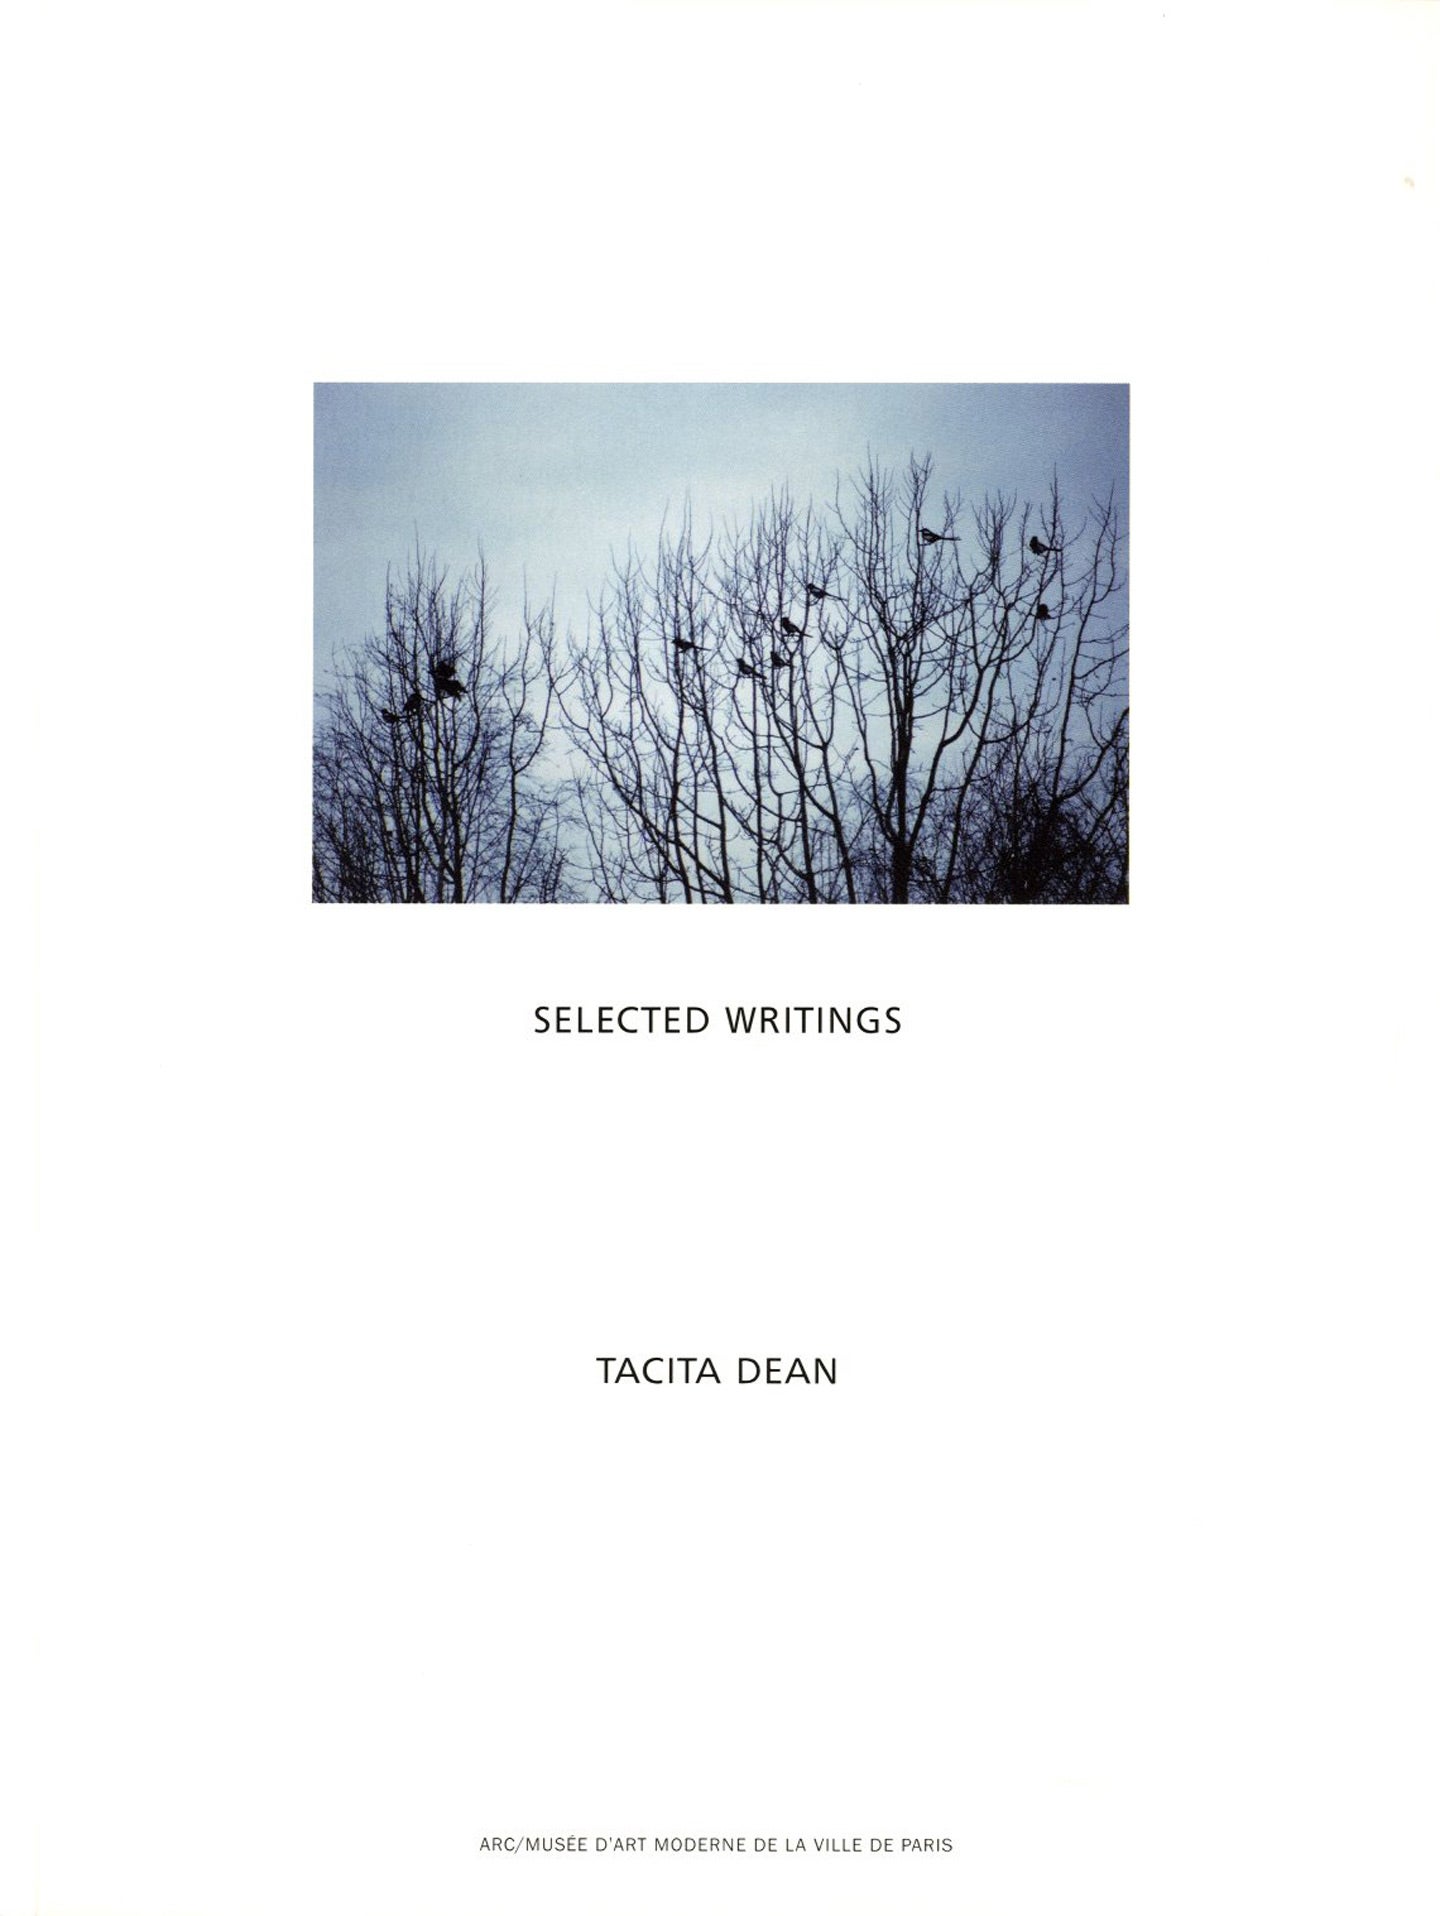 Tacita Dean: Seven Books Selected Writings, 12.10.02 - 21.12.02, W.G.  Sebald, The Russian Ending, Boots, Complete Works and Filmography  1991-2003, and